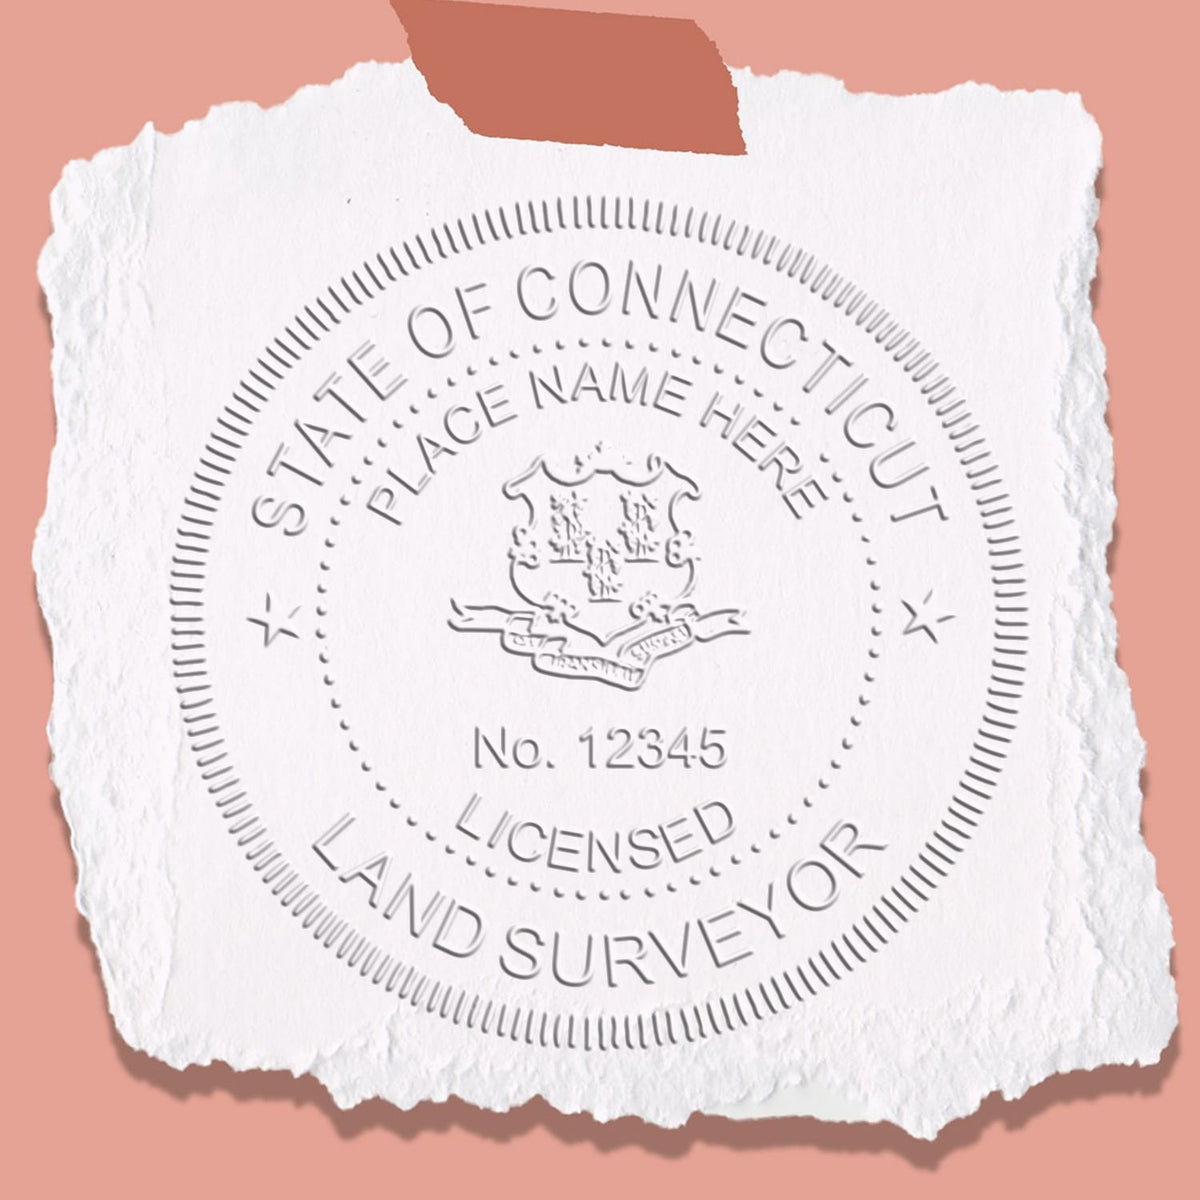 A lifestyle photo showing a stamped image of the Connecticut Desk Surveyor Seal Embosser on a piece of paper